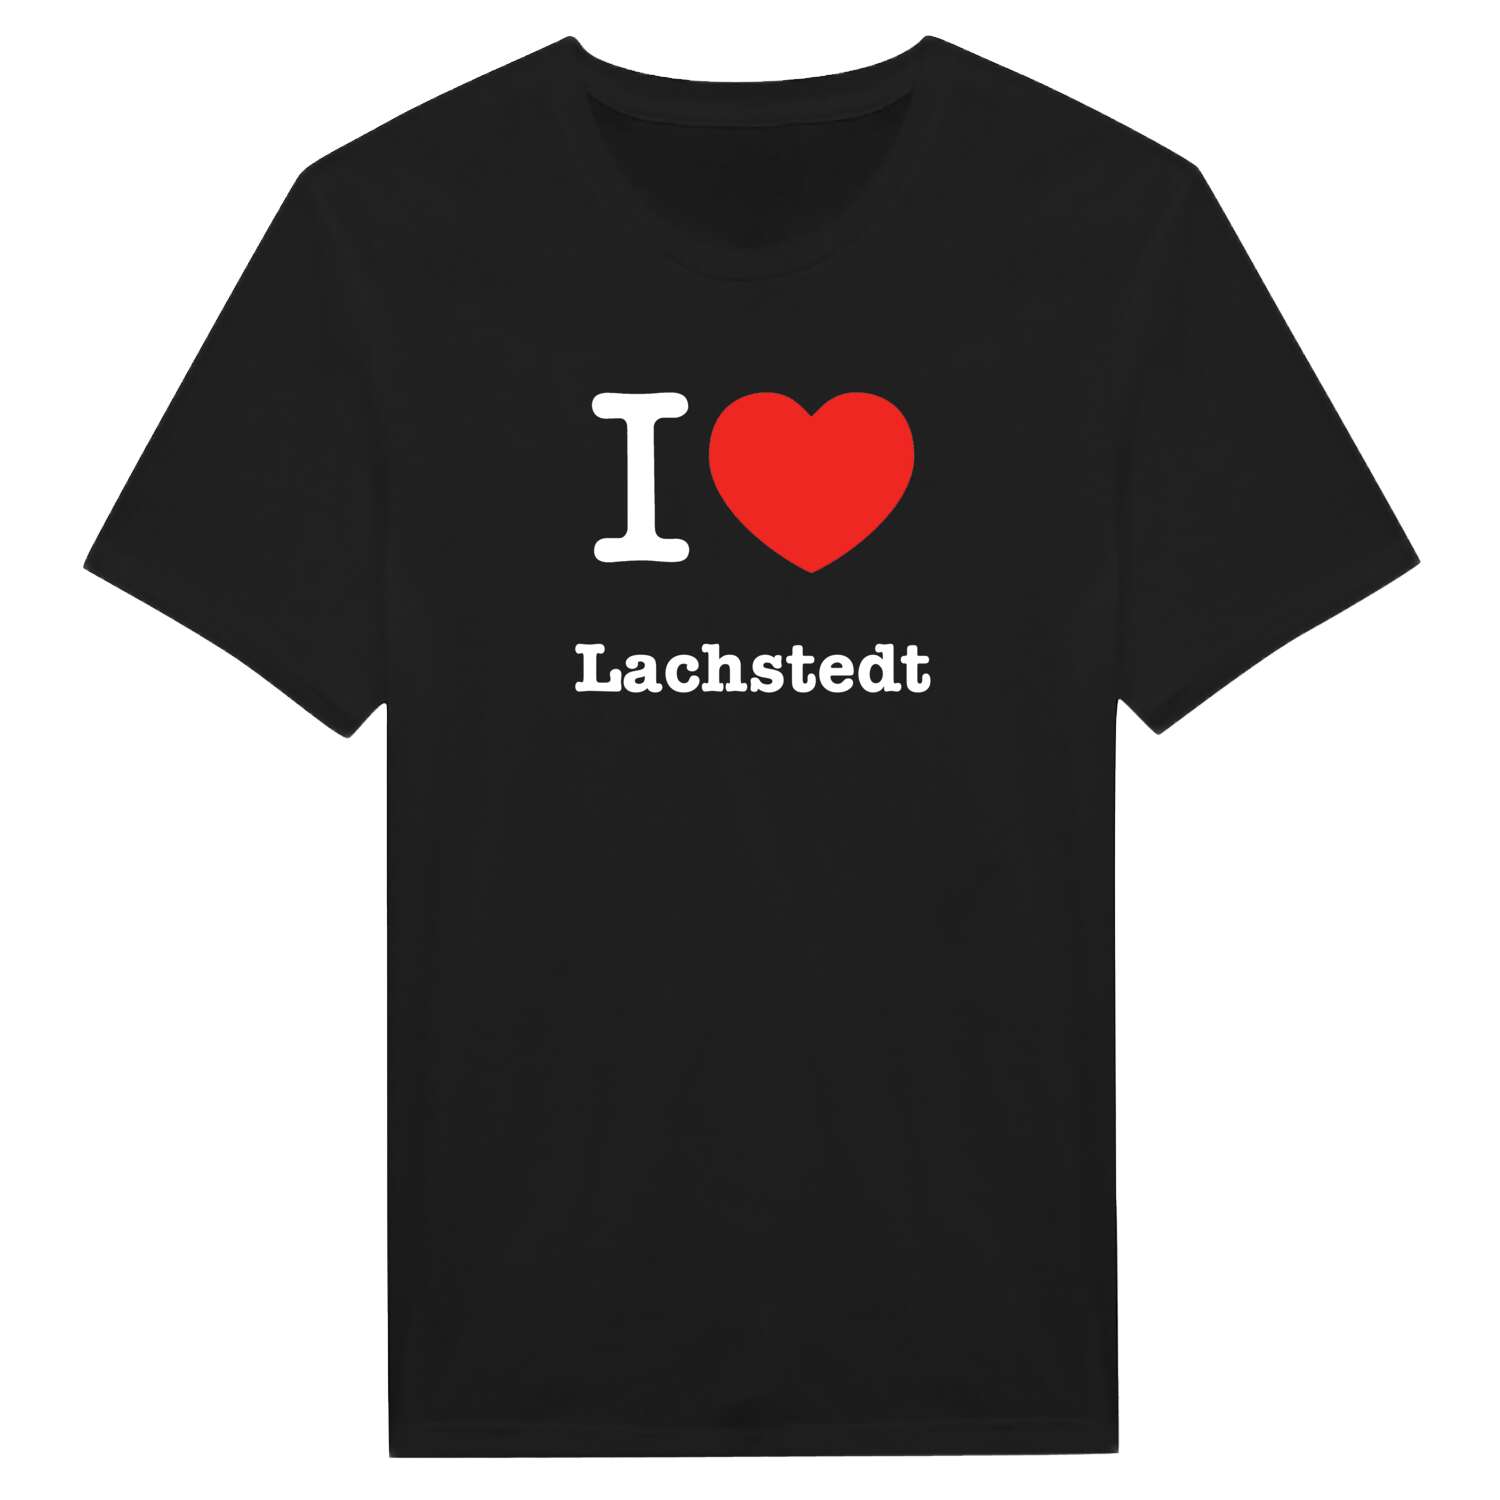 Lachstedt T-Shirt »I love«